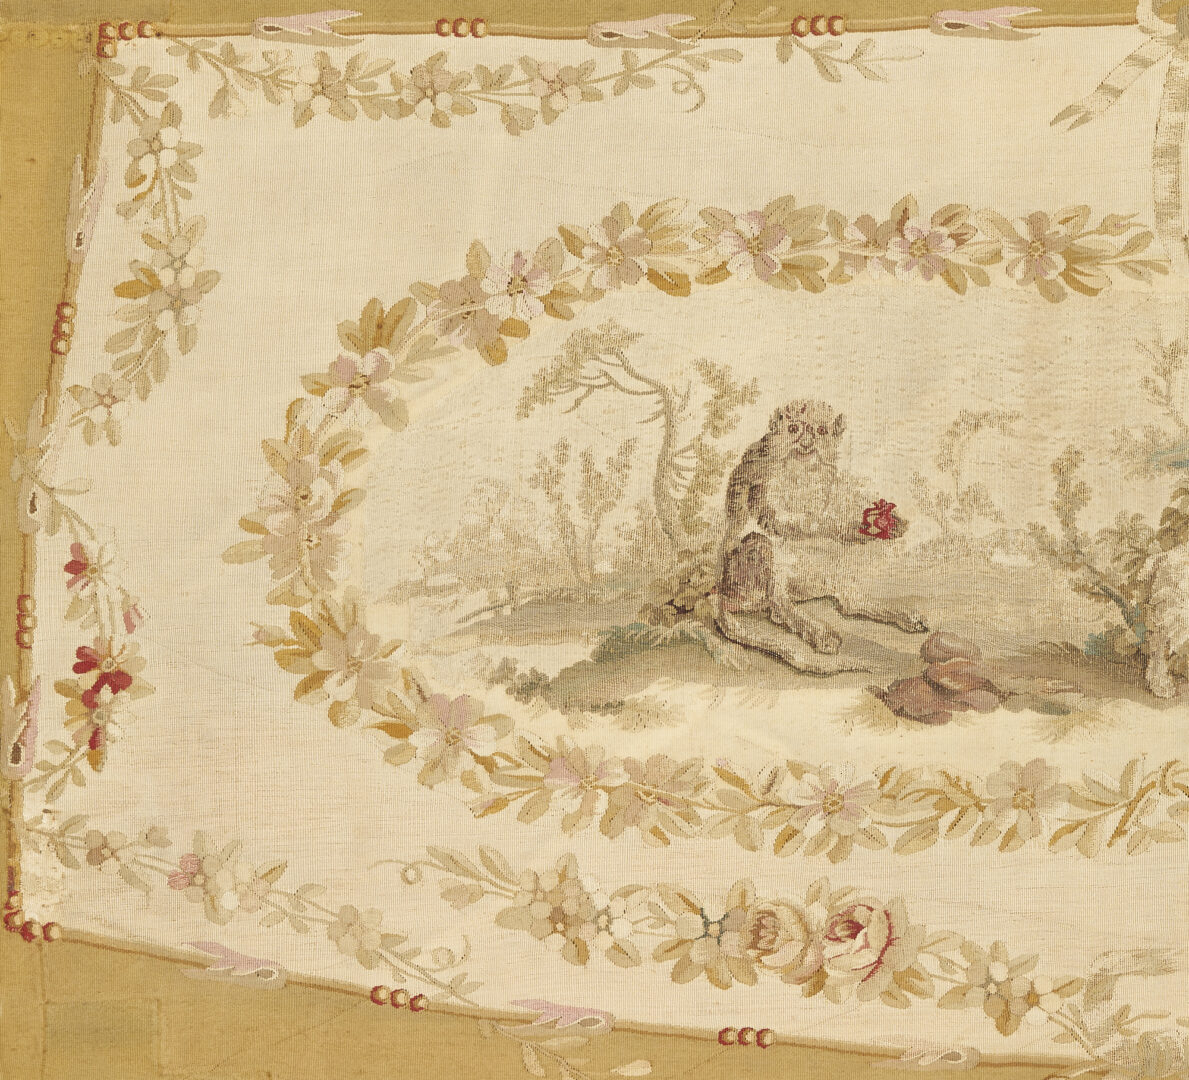 Lot 374: Framed Aubusson 18th c. Tapestry after J.B. Huet, Animals Parliament